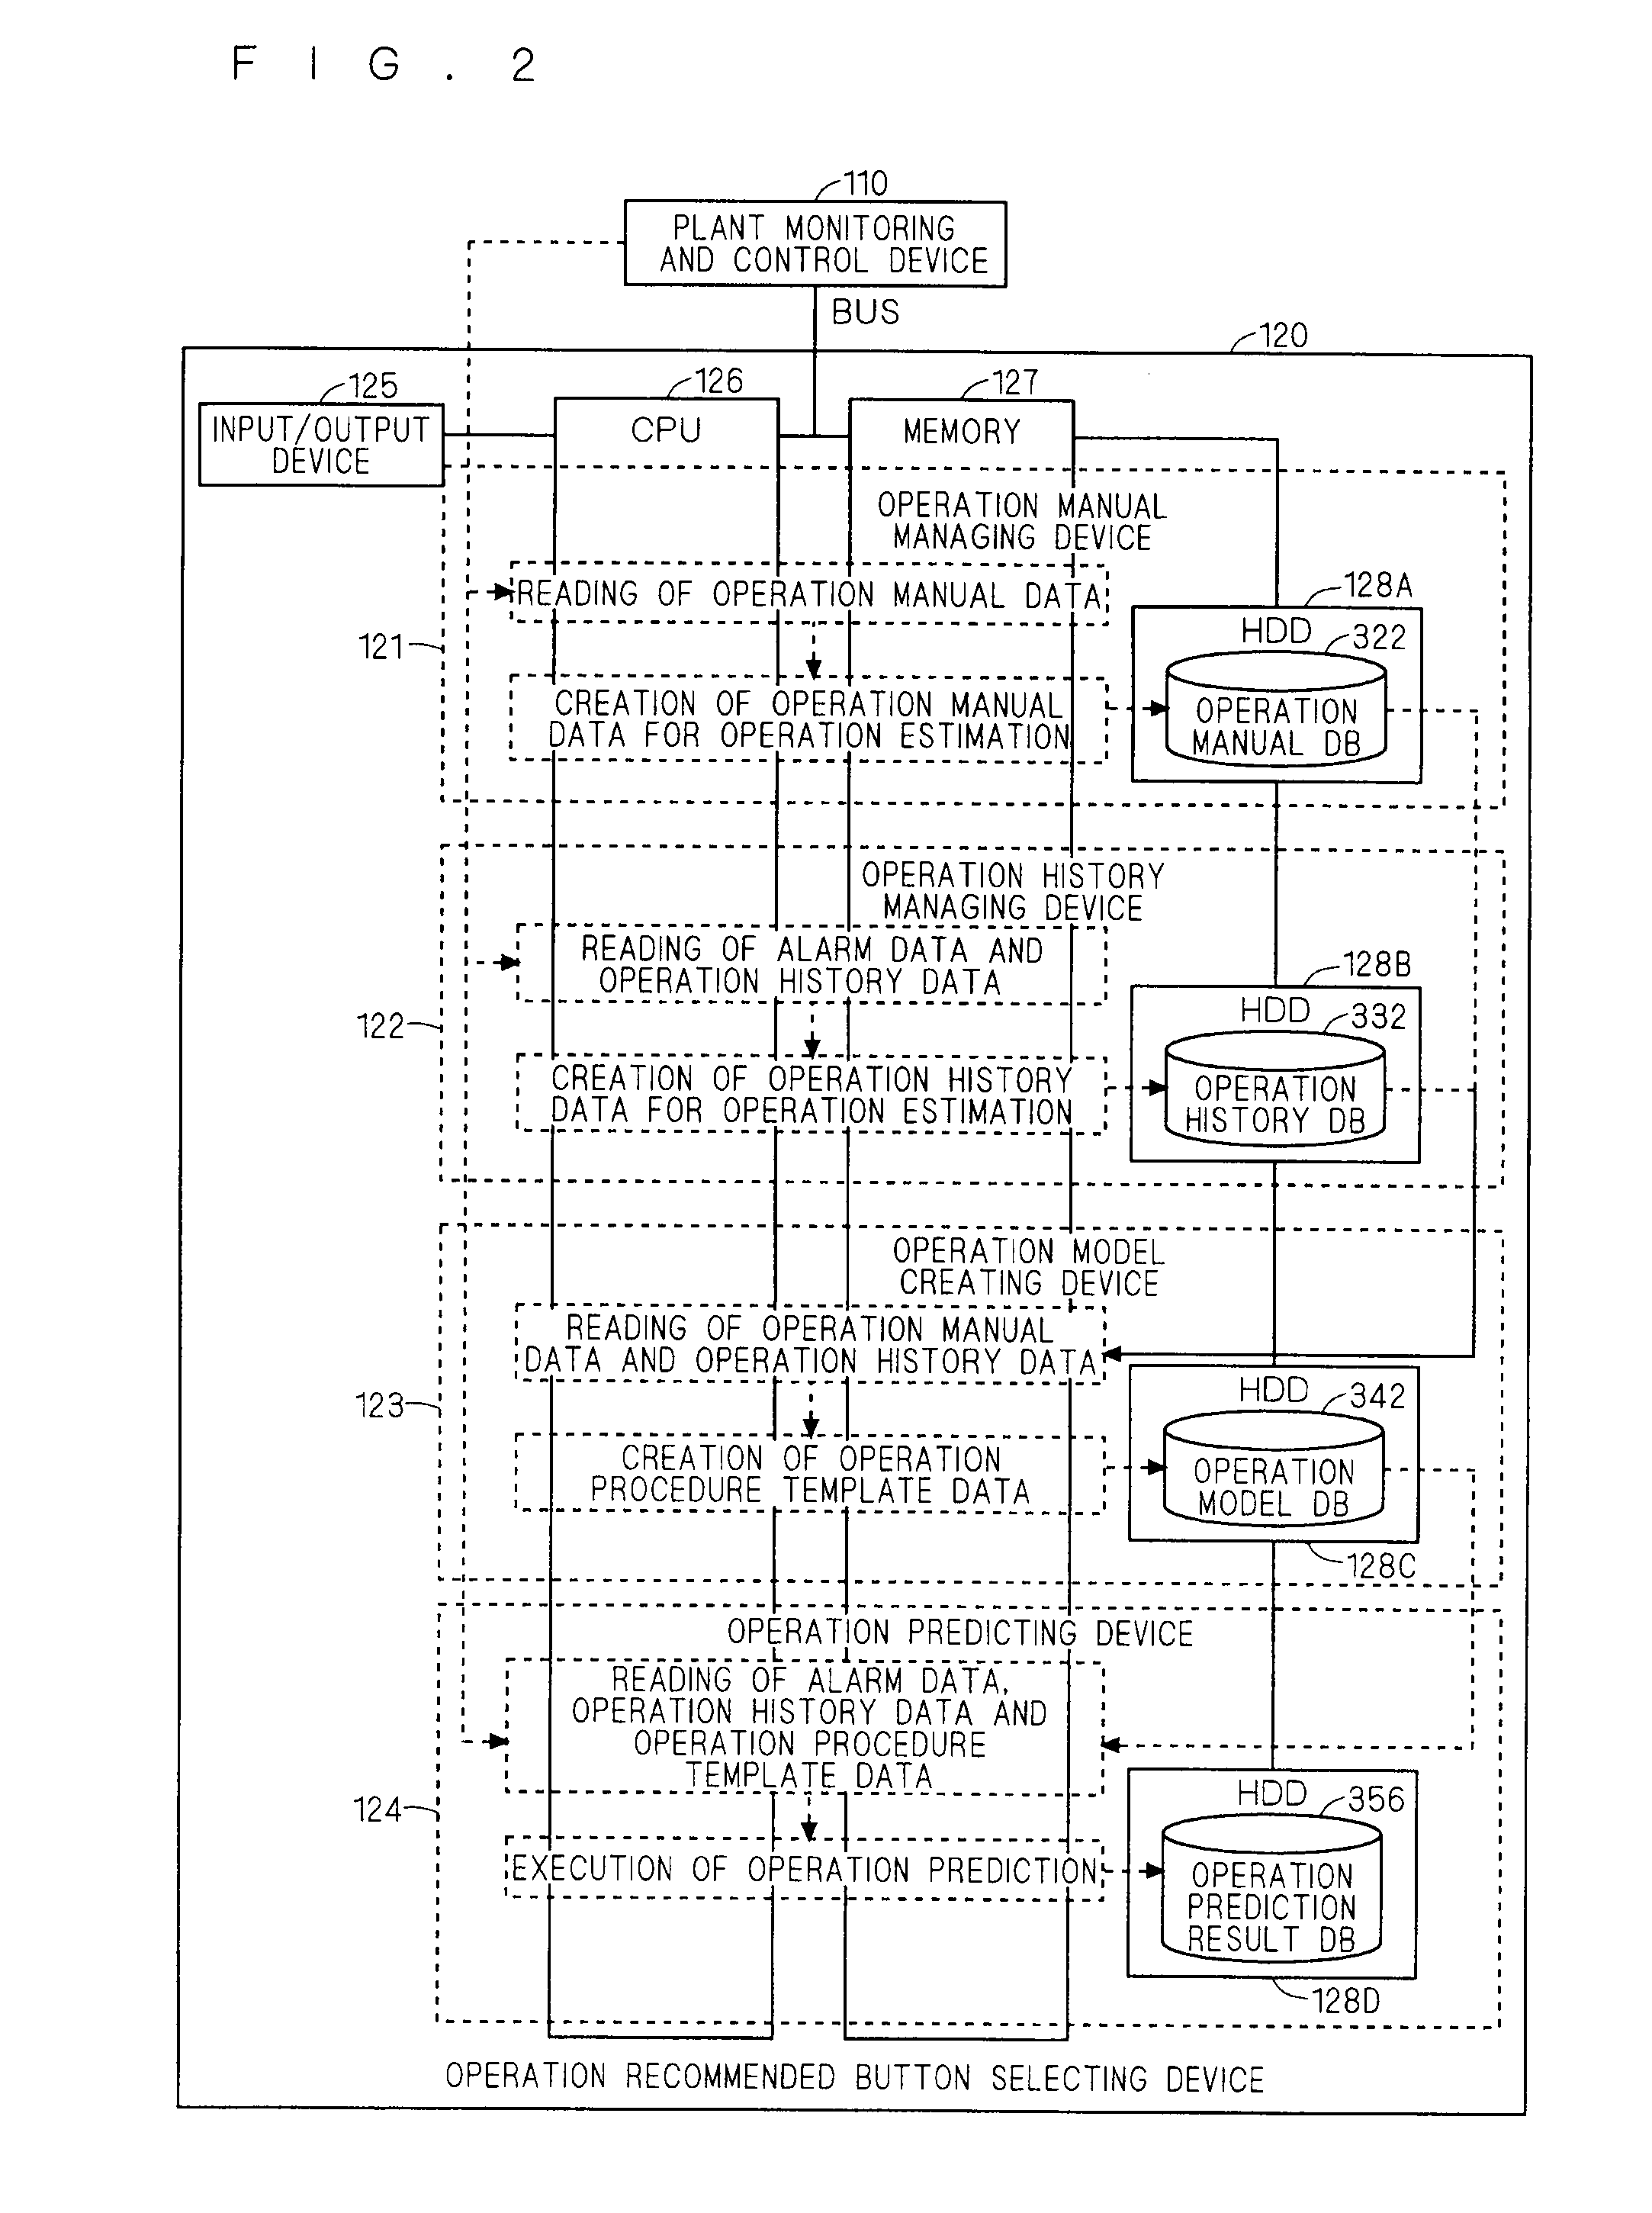 Graphical user interface device